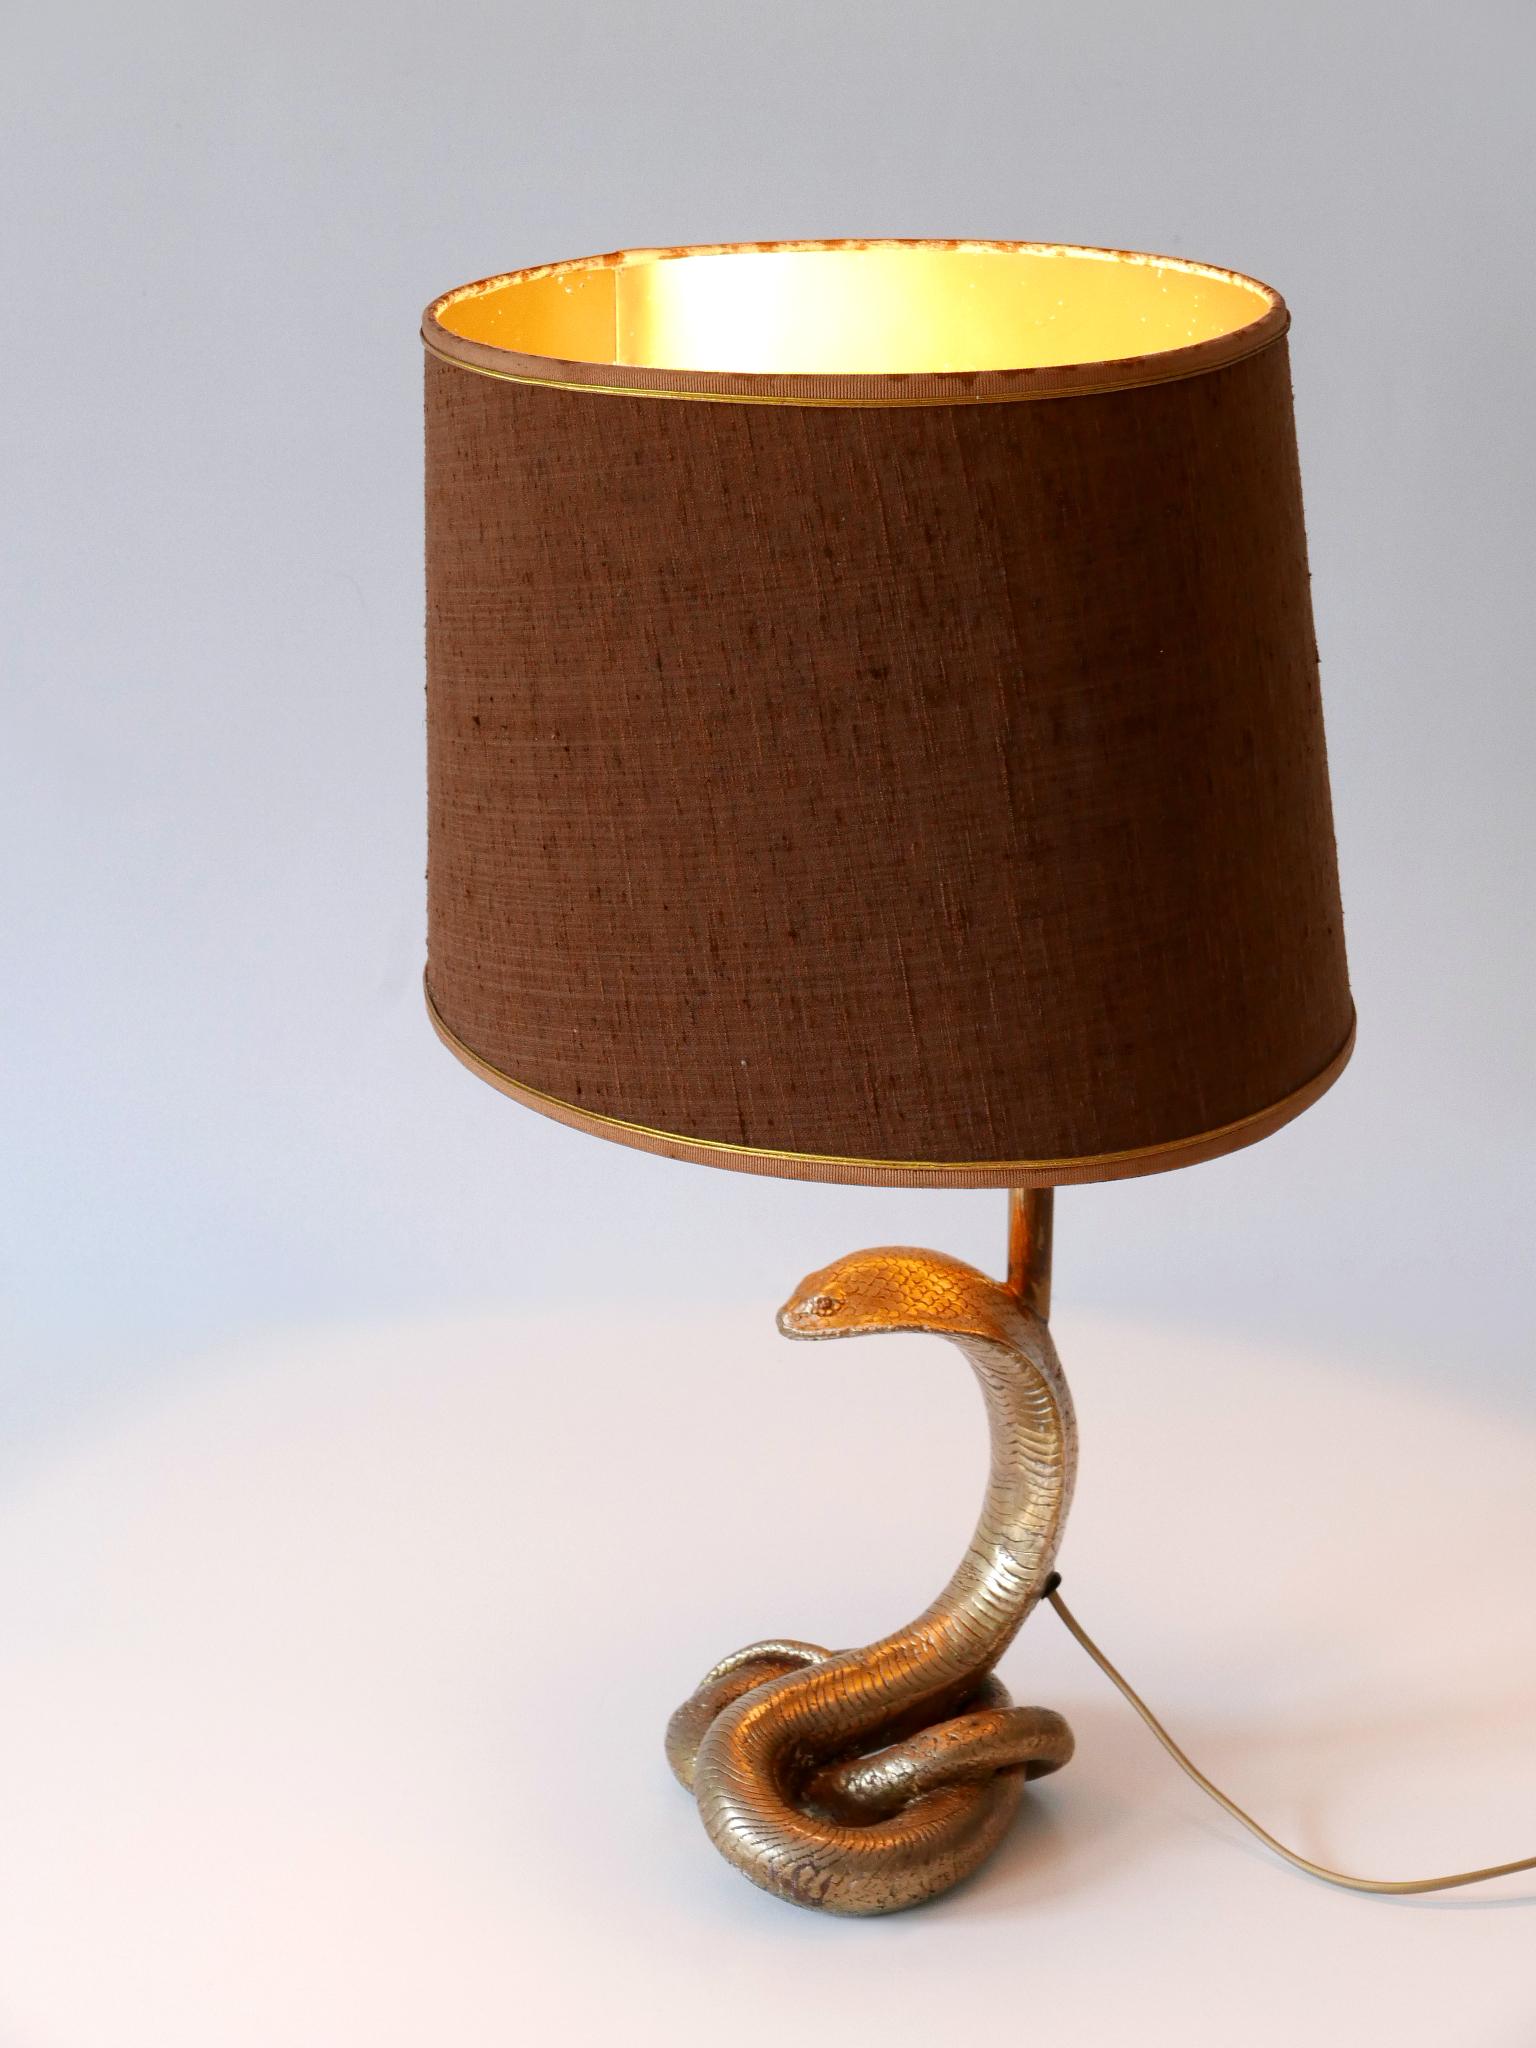 Exceptional Mid-Century Modern Cobra Table Lamp by Maison Jansen France 1970s For Sale 6